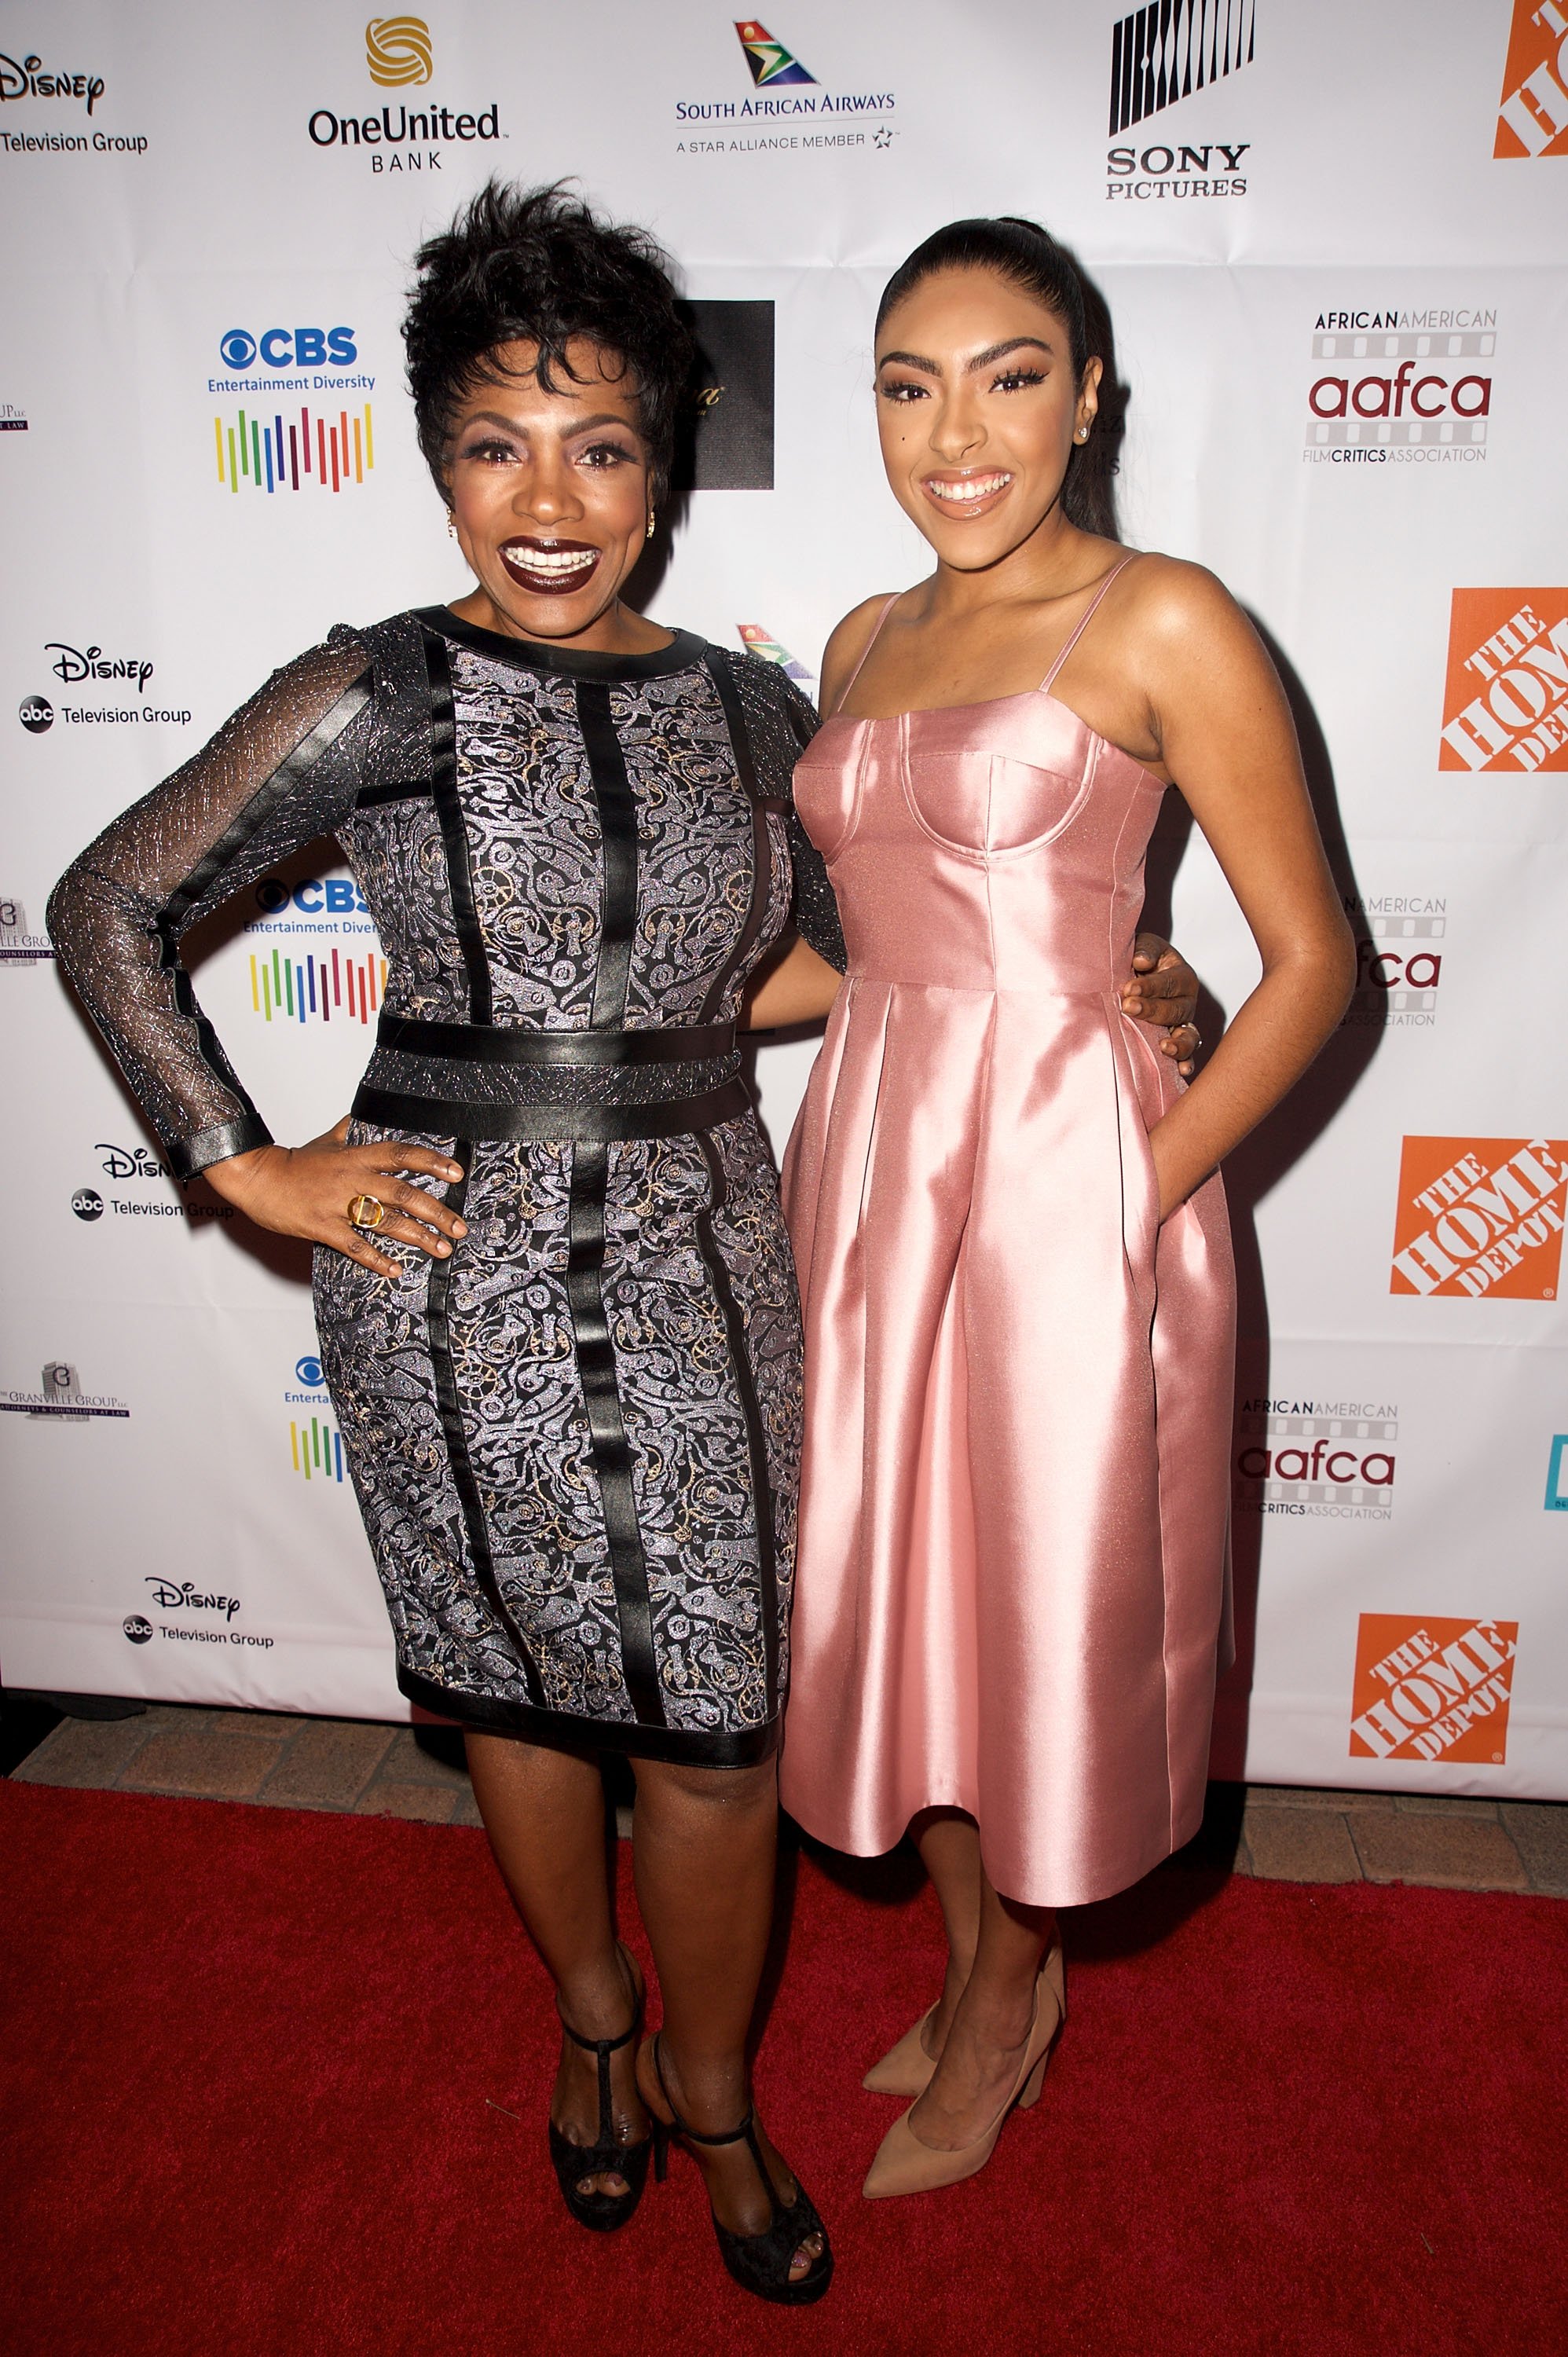 Sheryl Lee Ralph and Ivy-Victoria Maurice at the 7th Annual AAFCA Awards on February 10, 2016, in California | Source: Getty Images